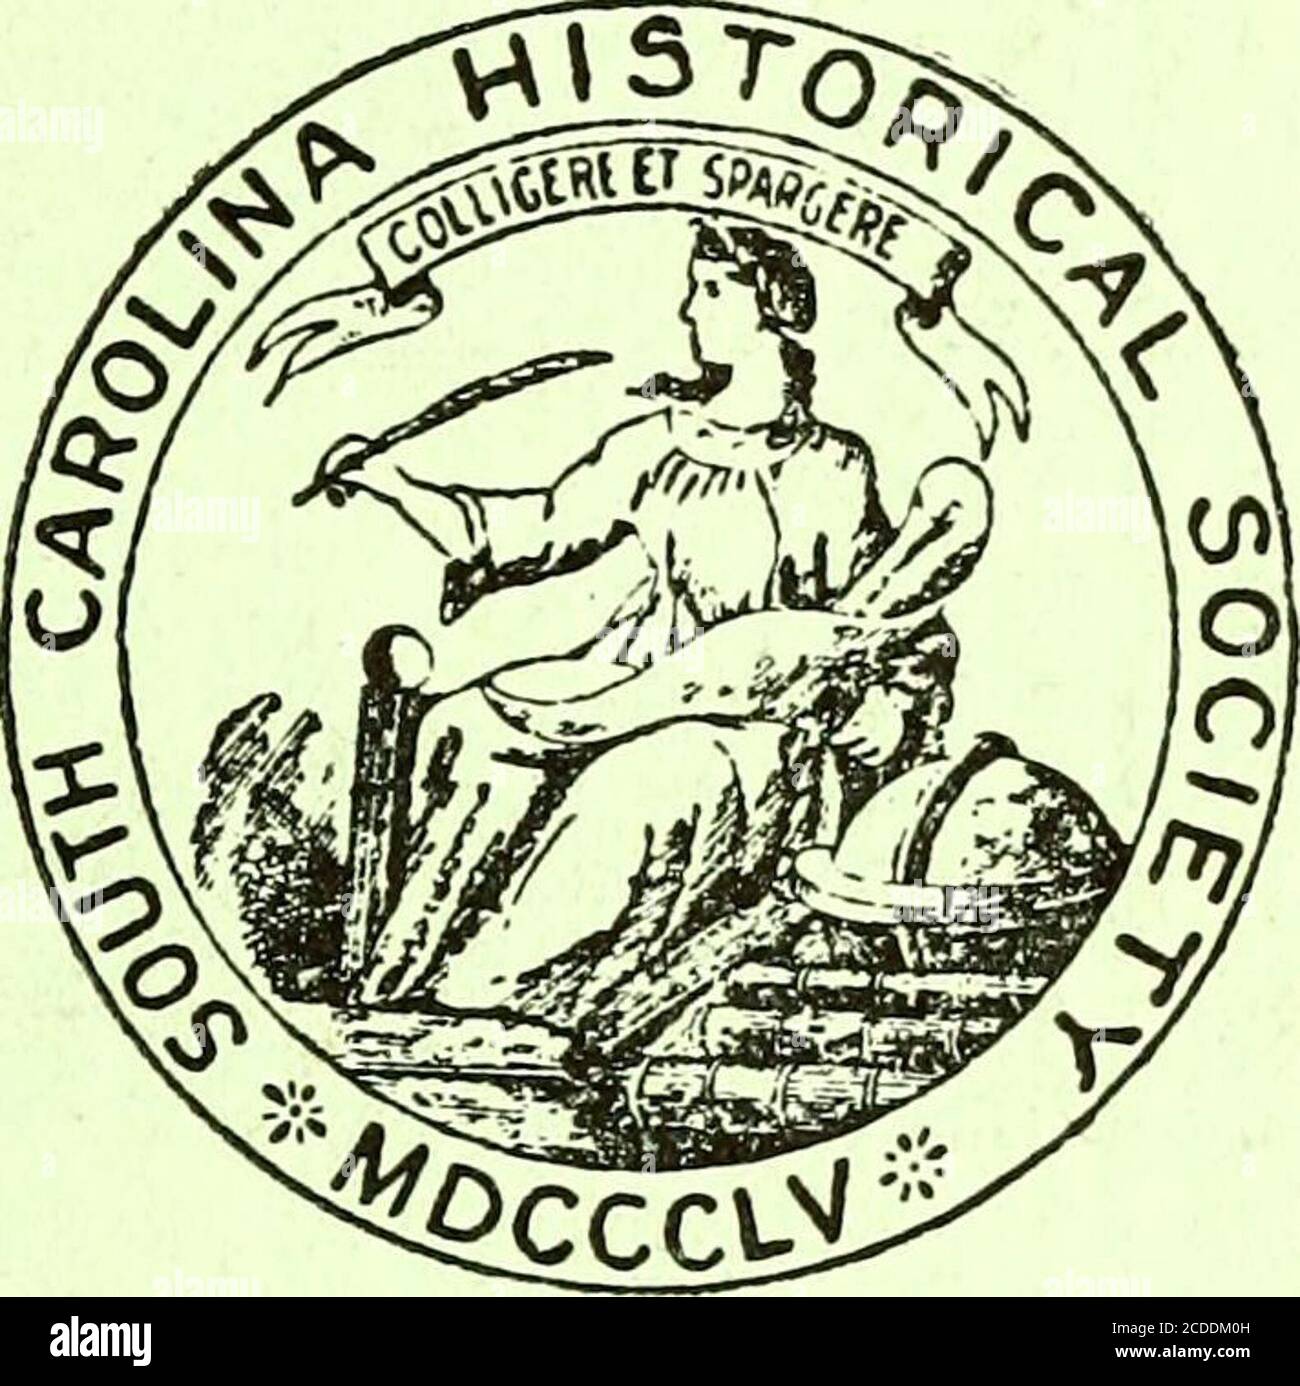 . The South Carolina historical and genealogical magazine . ffawcettthe marke X of Henry LeistGeorge ff rancklin LIST OF PUBLICATIONS OF THE SOUTH CAROLINA HISTORICAL SOCIETY COLLECTIONS Vol. I, 1857, $3.00; Vol. II, 1858, $3.00; Vol. Ill, 1859,out of print. Vol. IV, 1887, unbound, $3.00, bound, $4.00;Vol. V, 1897, paper, $3.00. PAMPHLETS Journal of a Voyage to Charlestown in So. Carolina byPelatiah Webster in 1765. Edited by Prof. T. P. Harrison,1898. 75c. The History of the Santee Canal. By Prof. F. A.Porcher. With an Appendix by A. S. Salley, Jr., 1903. 75c. THE SOUTH CAROLINA HISTORICAL AN Stock Photo